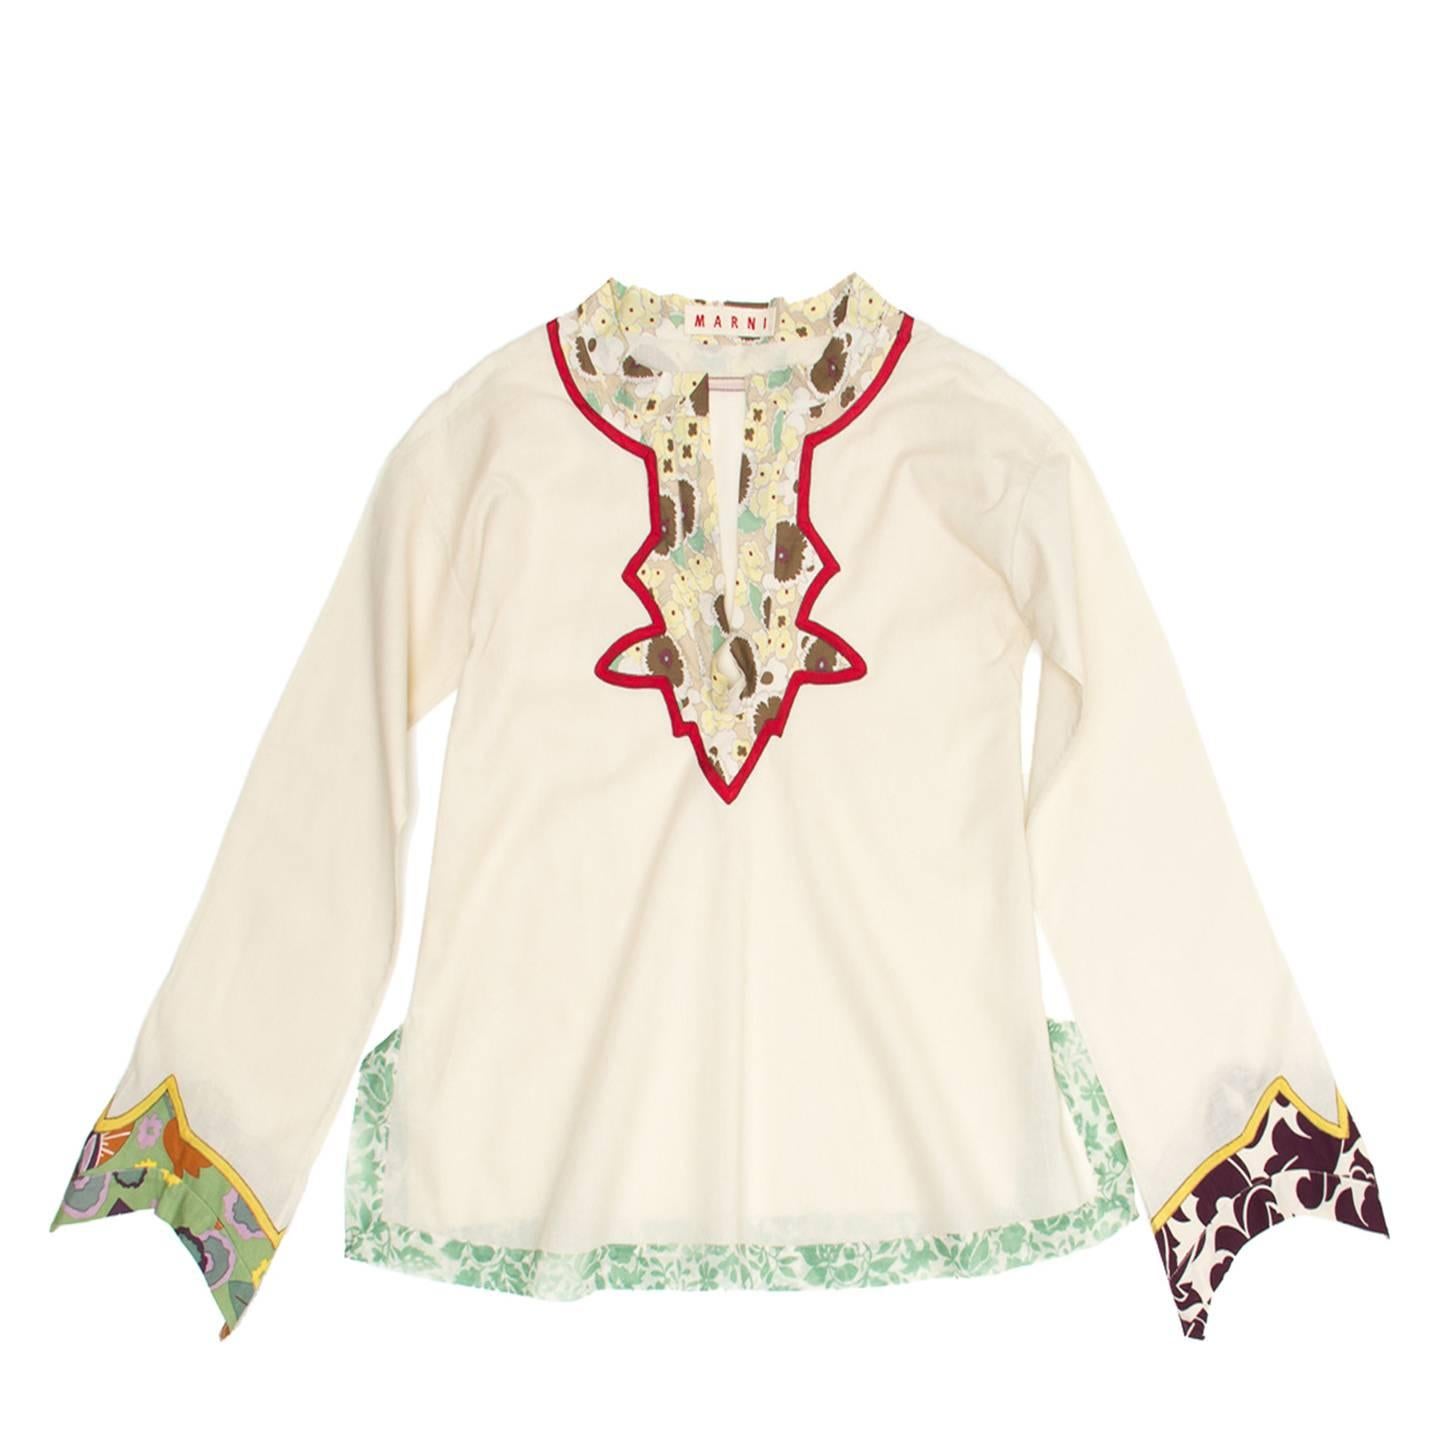 Cream cotton tunic top with long sleeves, below hip length and Indian motif floral details. The neckline is enriched by a small floral print standing collar and inserts with a red profile around neck and front opening. The body part has a slight